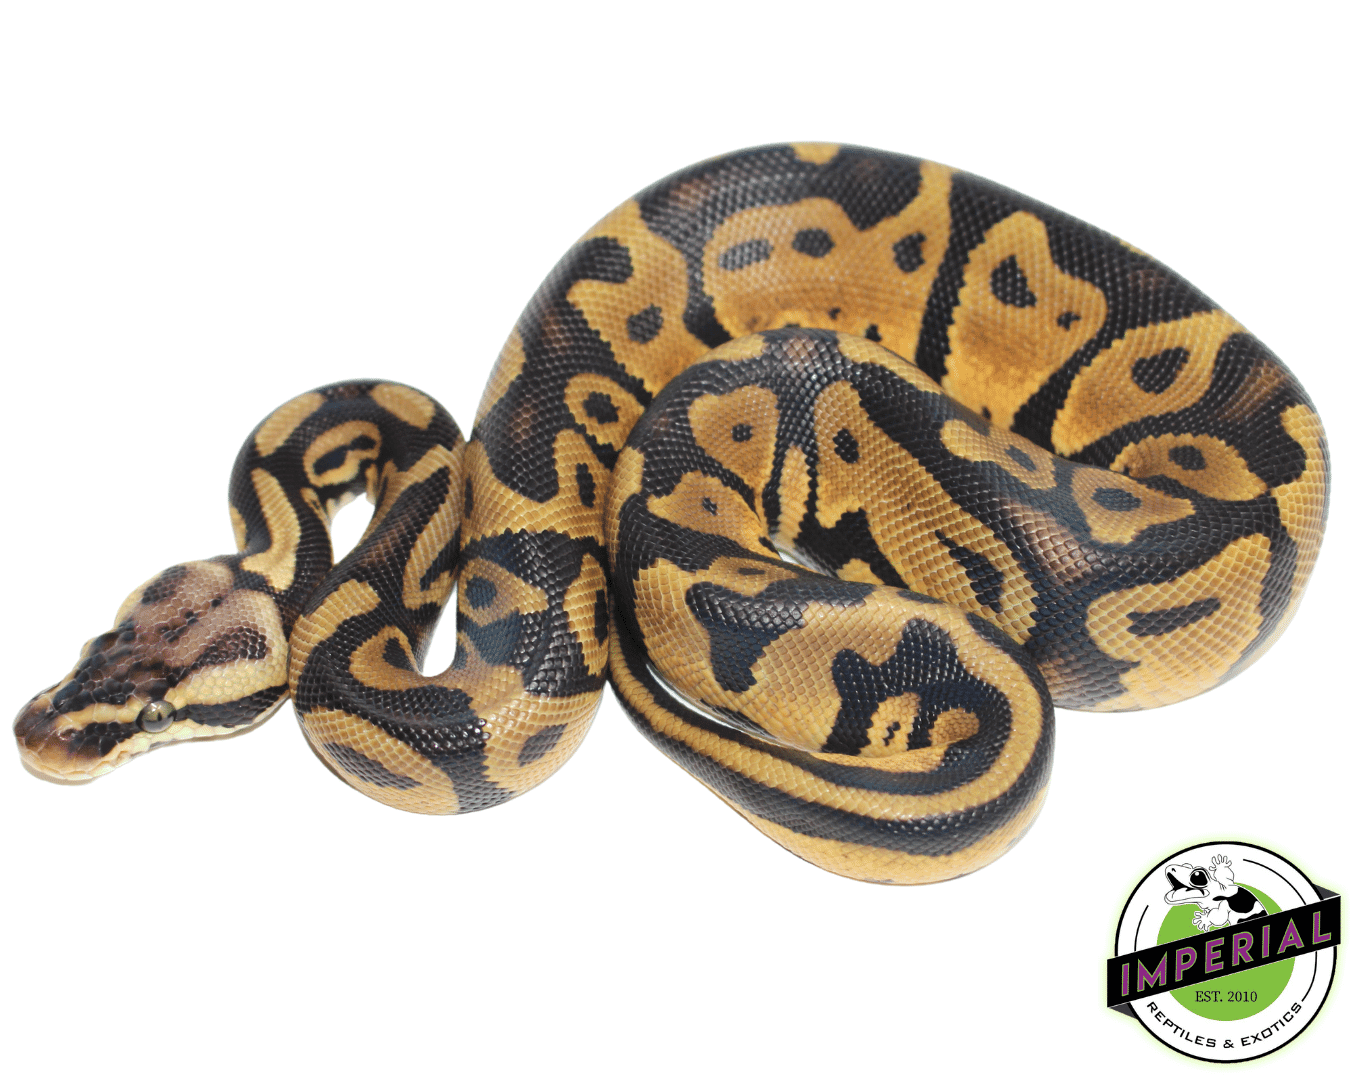 pastel leopard yellowbelly ball python for sale online, buy ball pythons near me at cheap prices